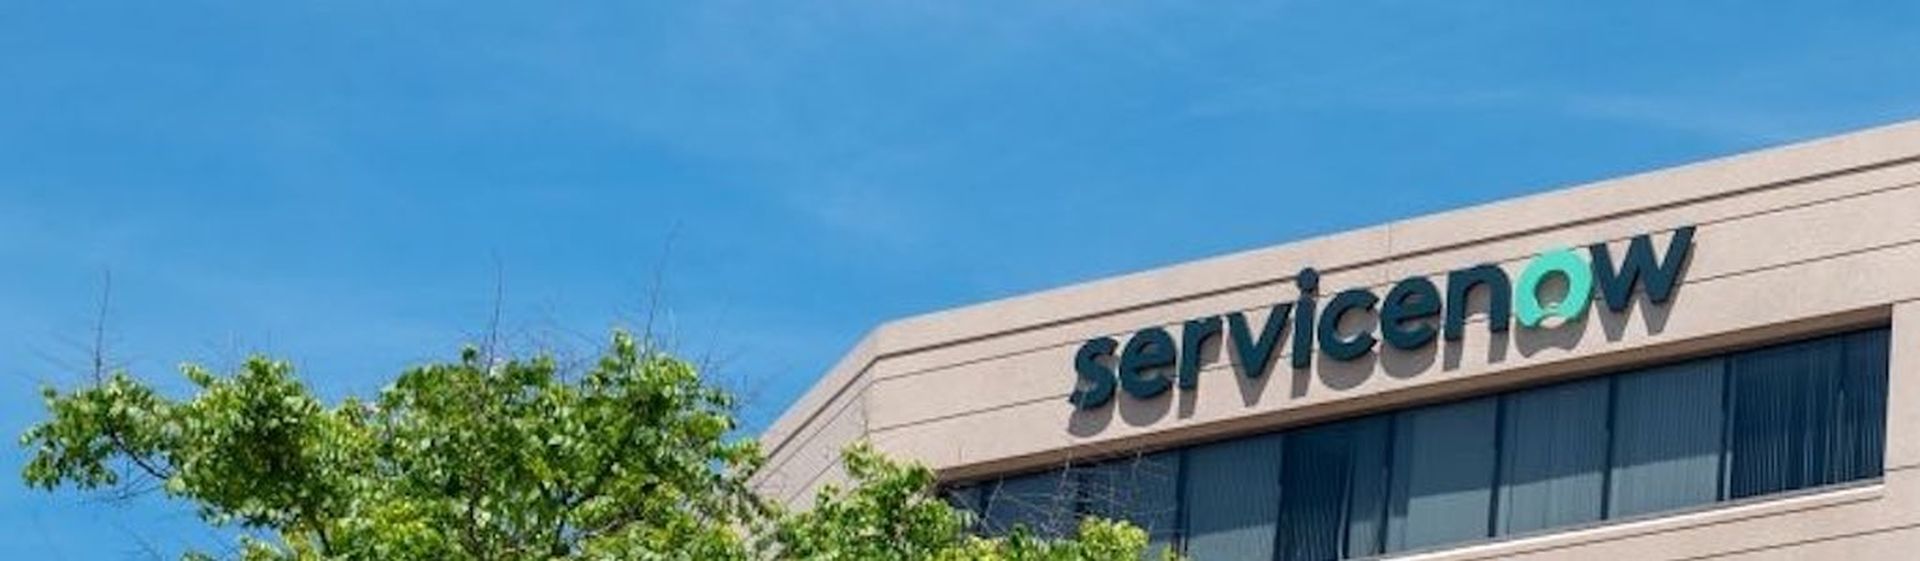 ServiceNow offices with new logo